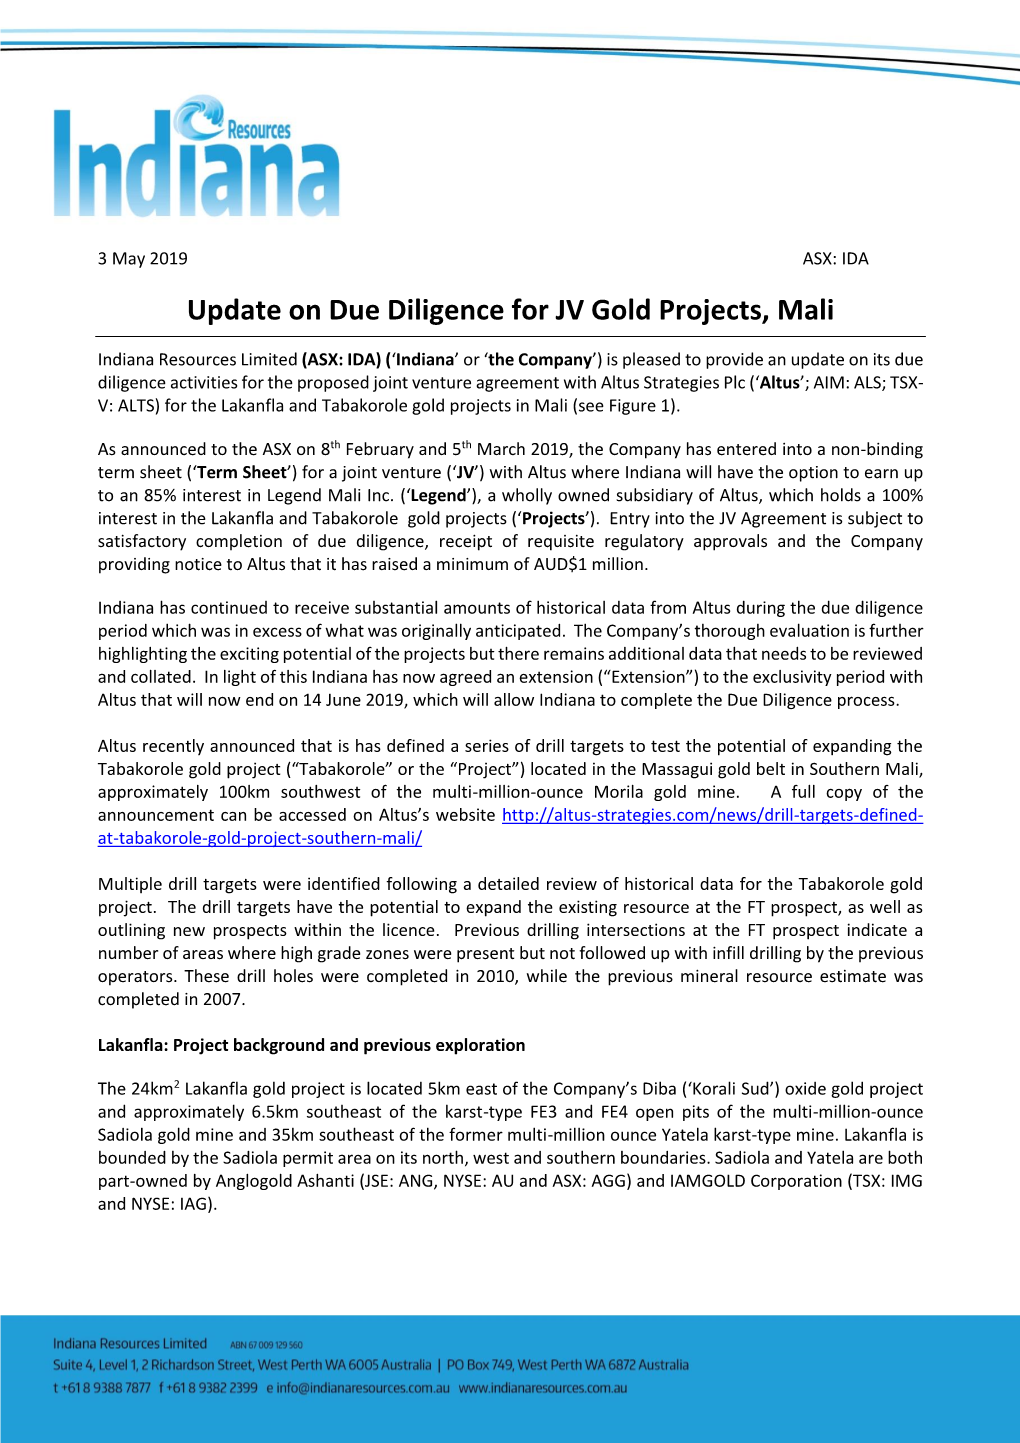 Update on Due Diligence for JV Gold Projects, Mali